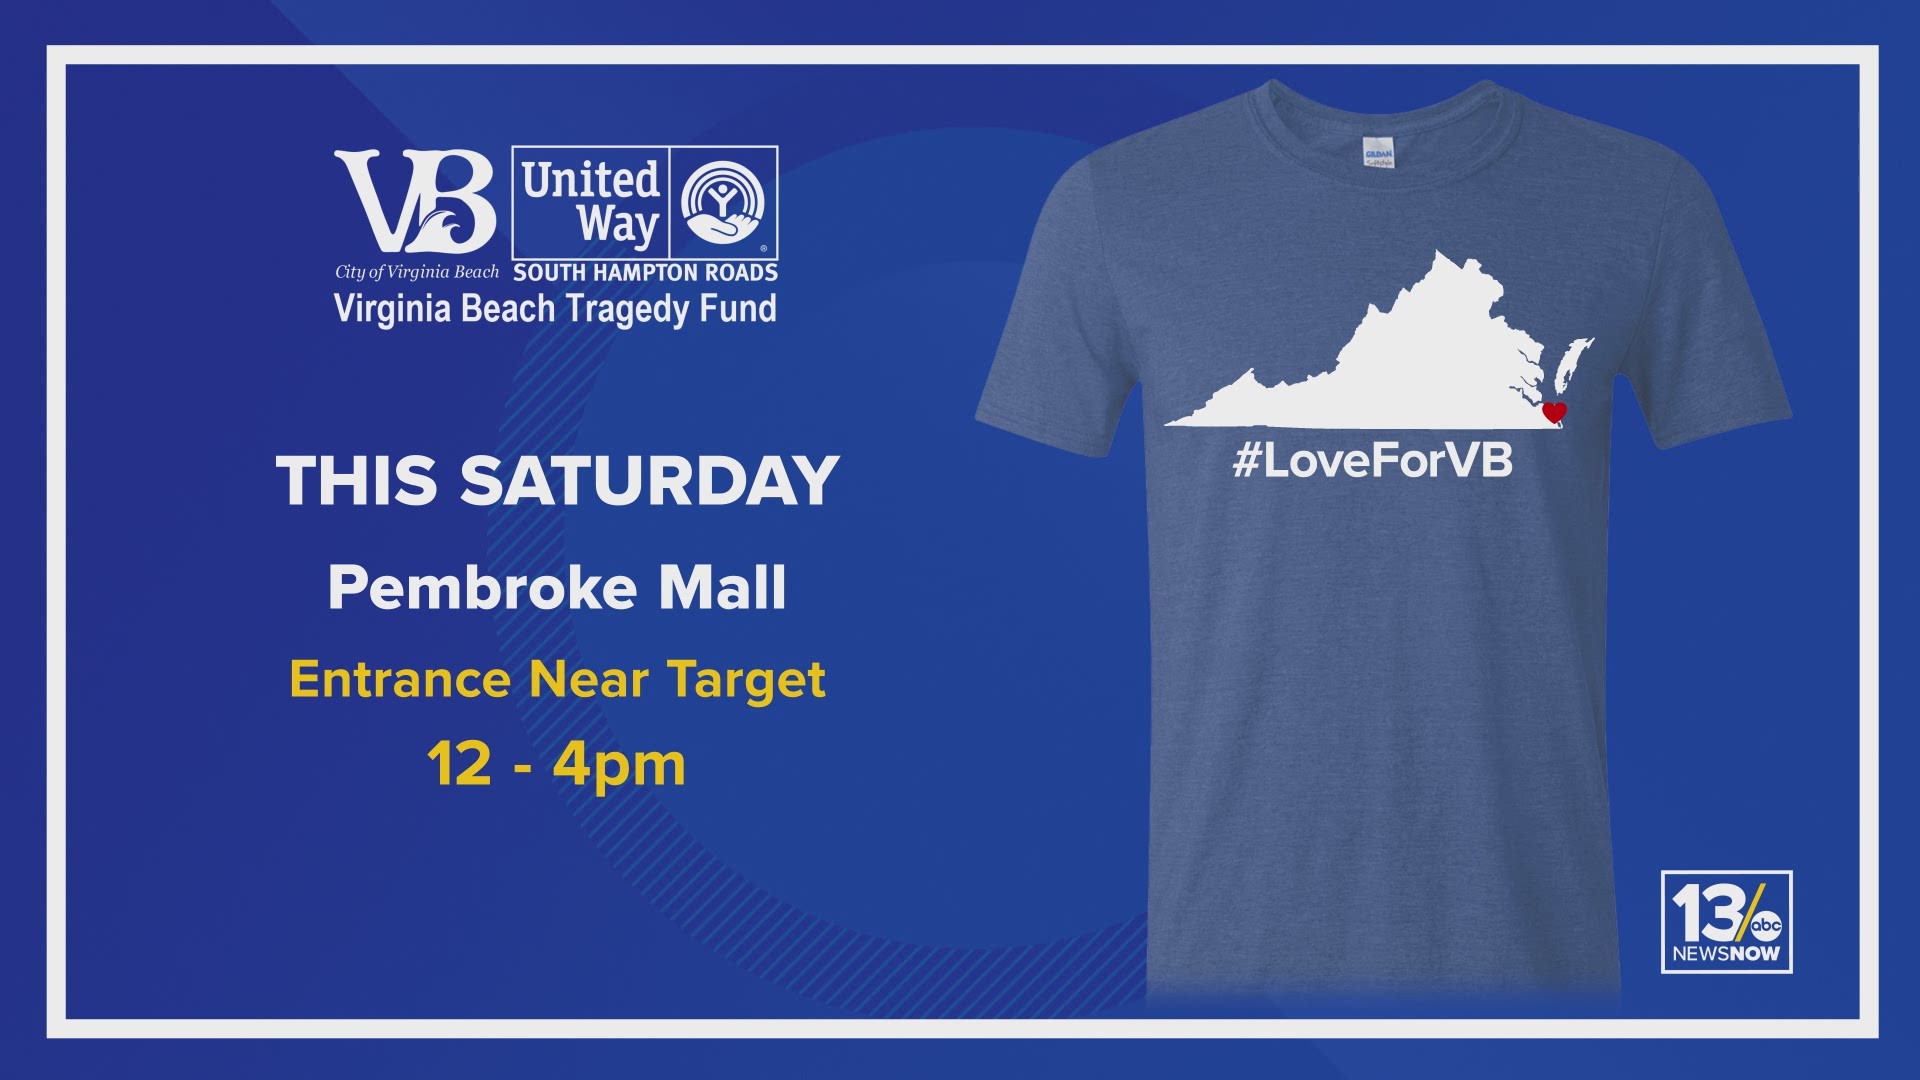 For a minimum $15 donation to the Virginia Beach Tragedy Fund, people can receive a #LoveForVB T-shirt. ALL money supports the people affected by the Virginia Beach Municipal Center shooting. (The T-shirt quantity is limited.)